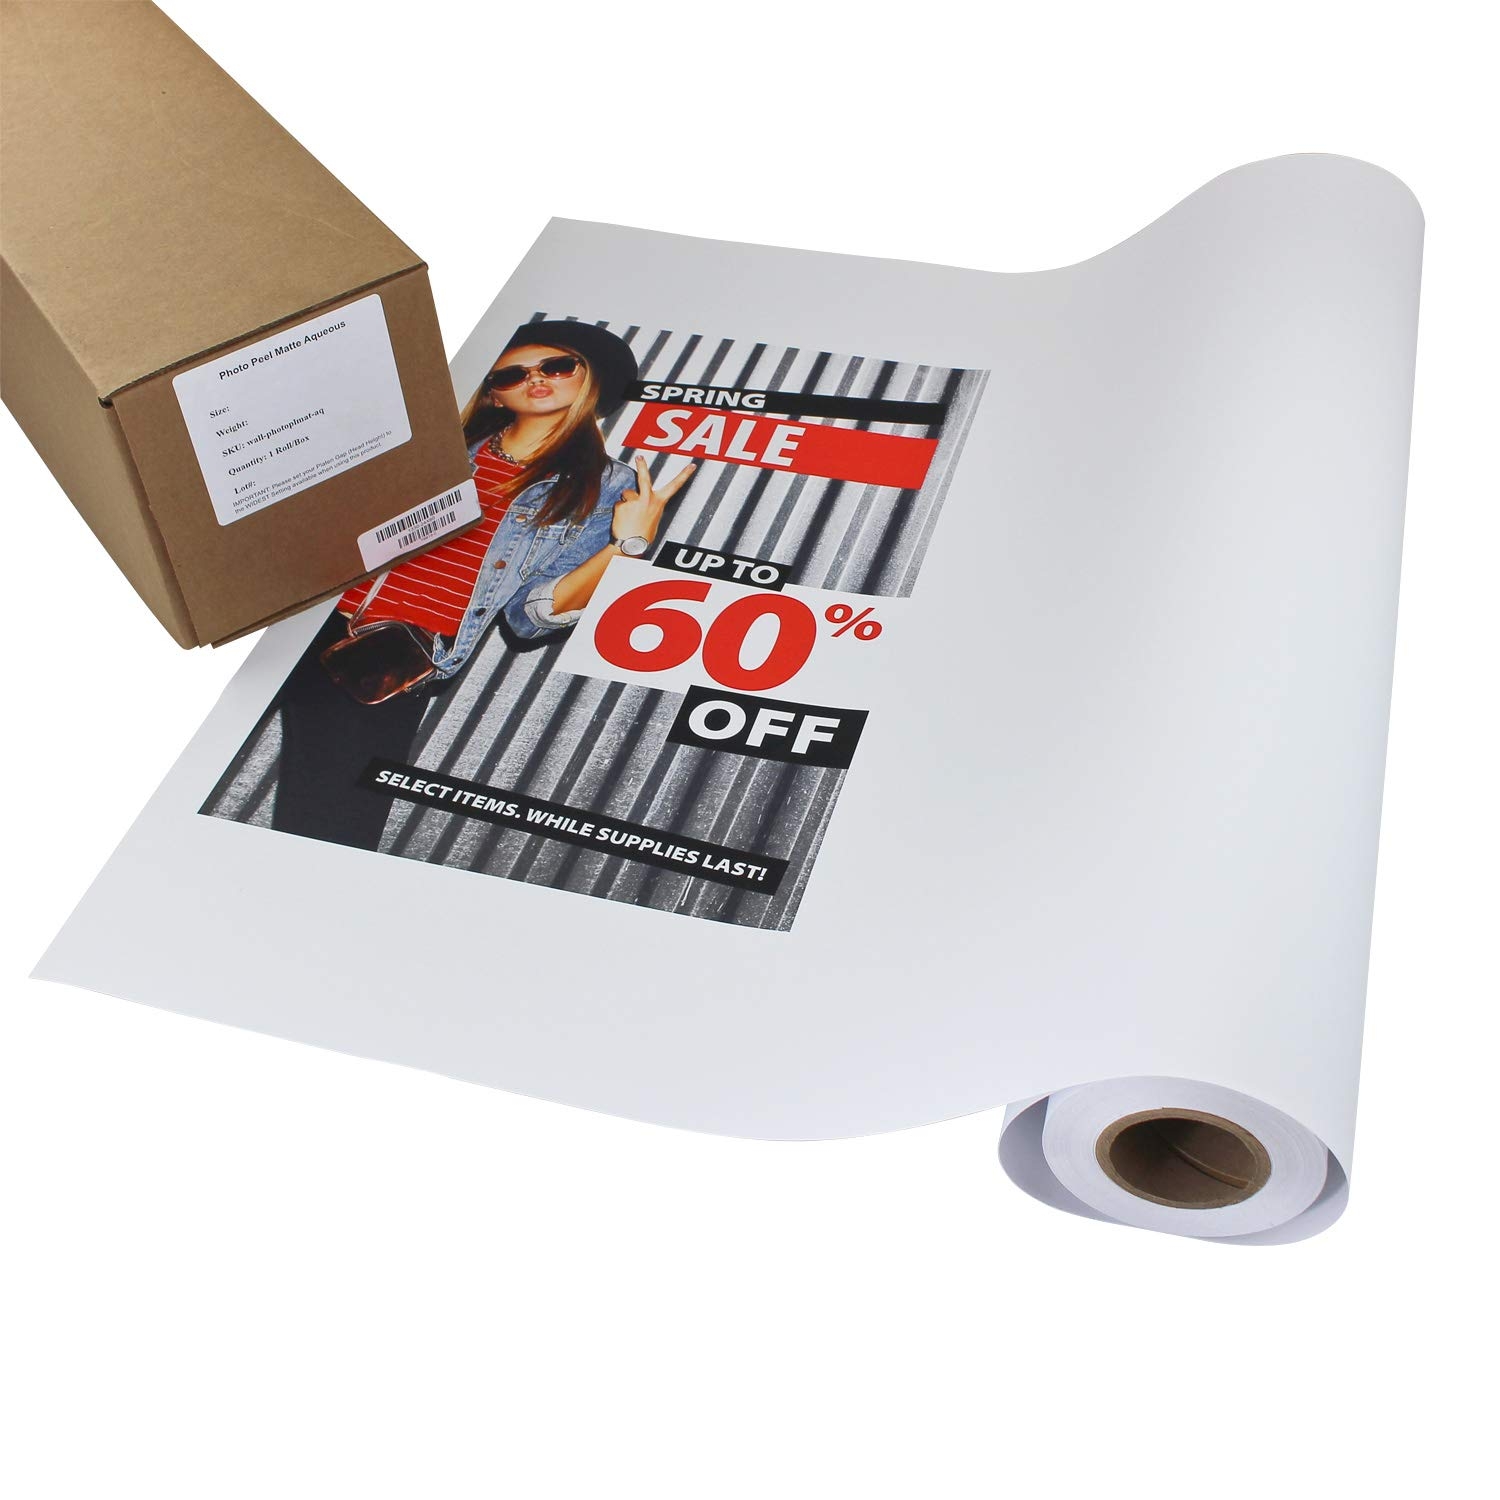 Amazon Photo Peel Matte Printable Adhesive Vinyl Roll 36 Inches X 60 Feet Inkjet Peel And Stick Sticker Paper Works With All Inkjet Printers Including Professional Makes And Models Like Epson